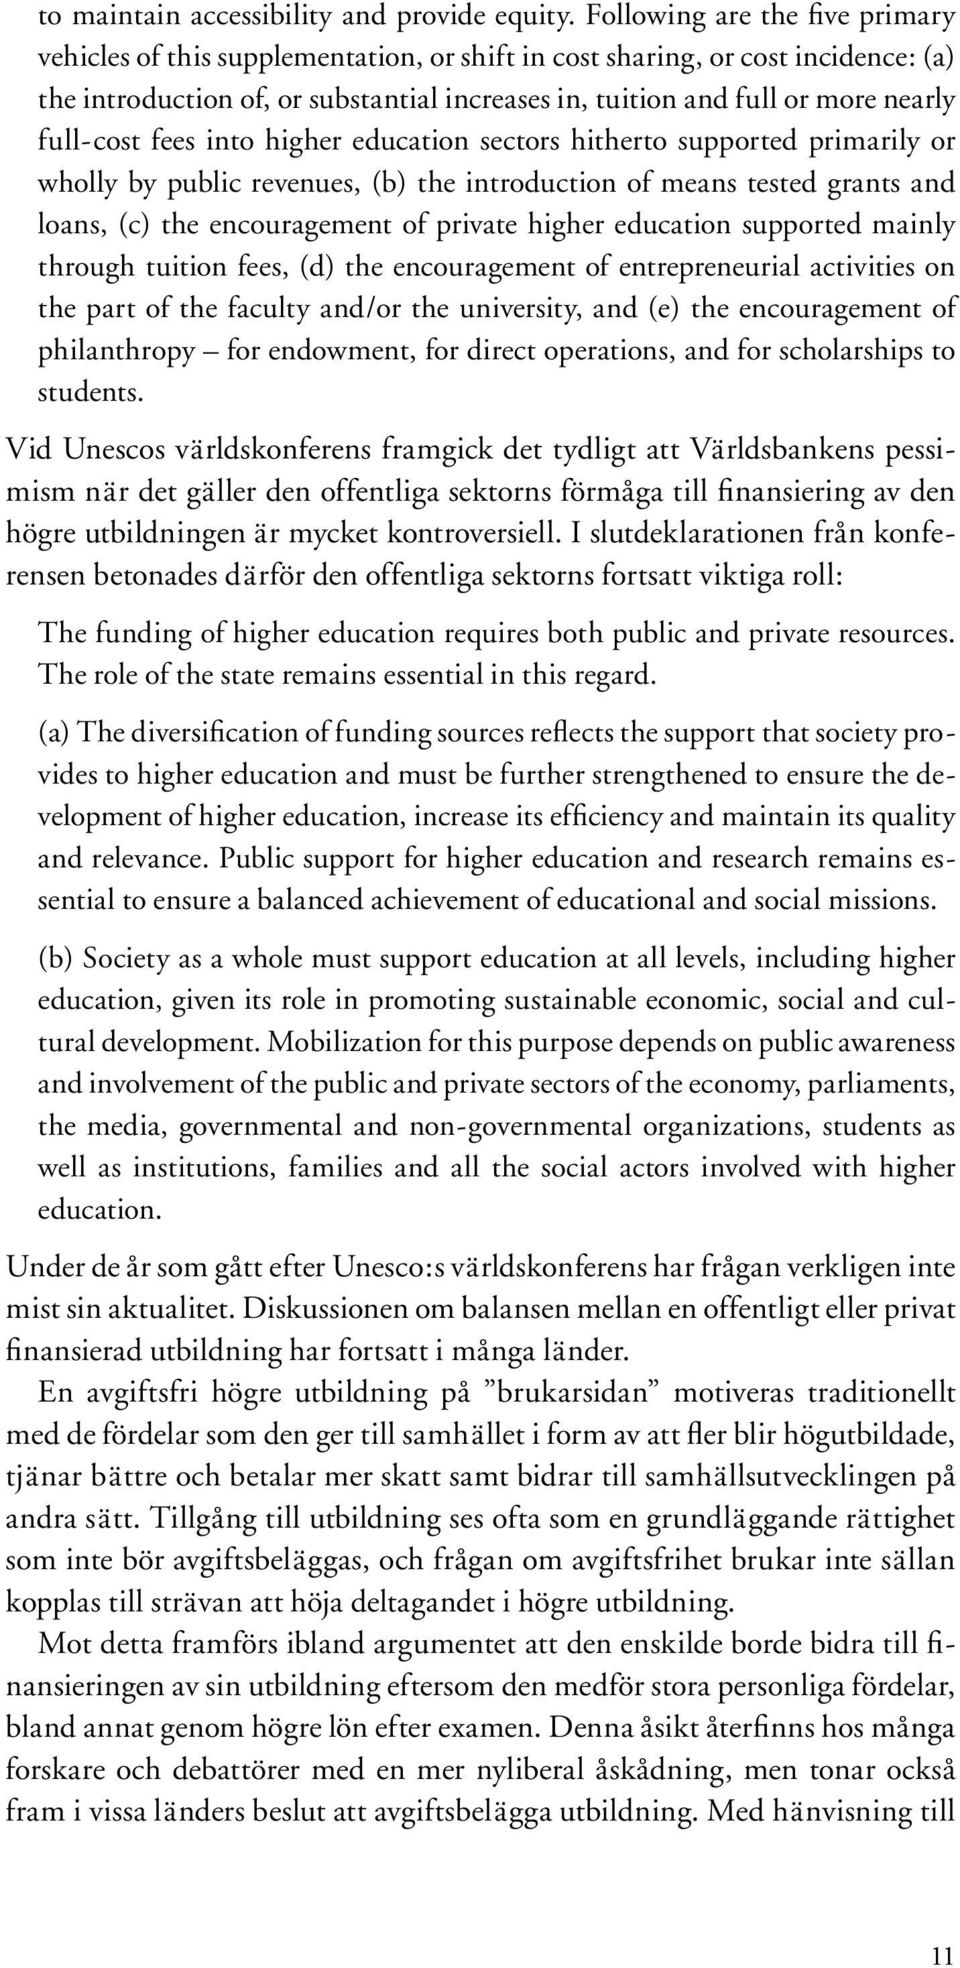 full-cost fees into higher education sectors hitherto supported primarily or wholly by public revenues, (b) the introduction of means tested grants and loans, (c) the encouragement of private higher